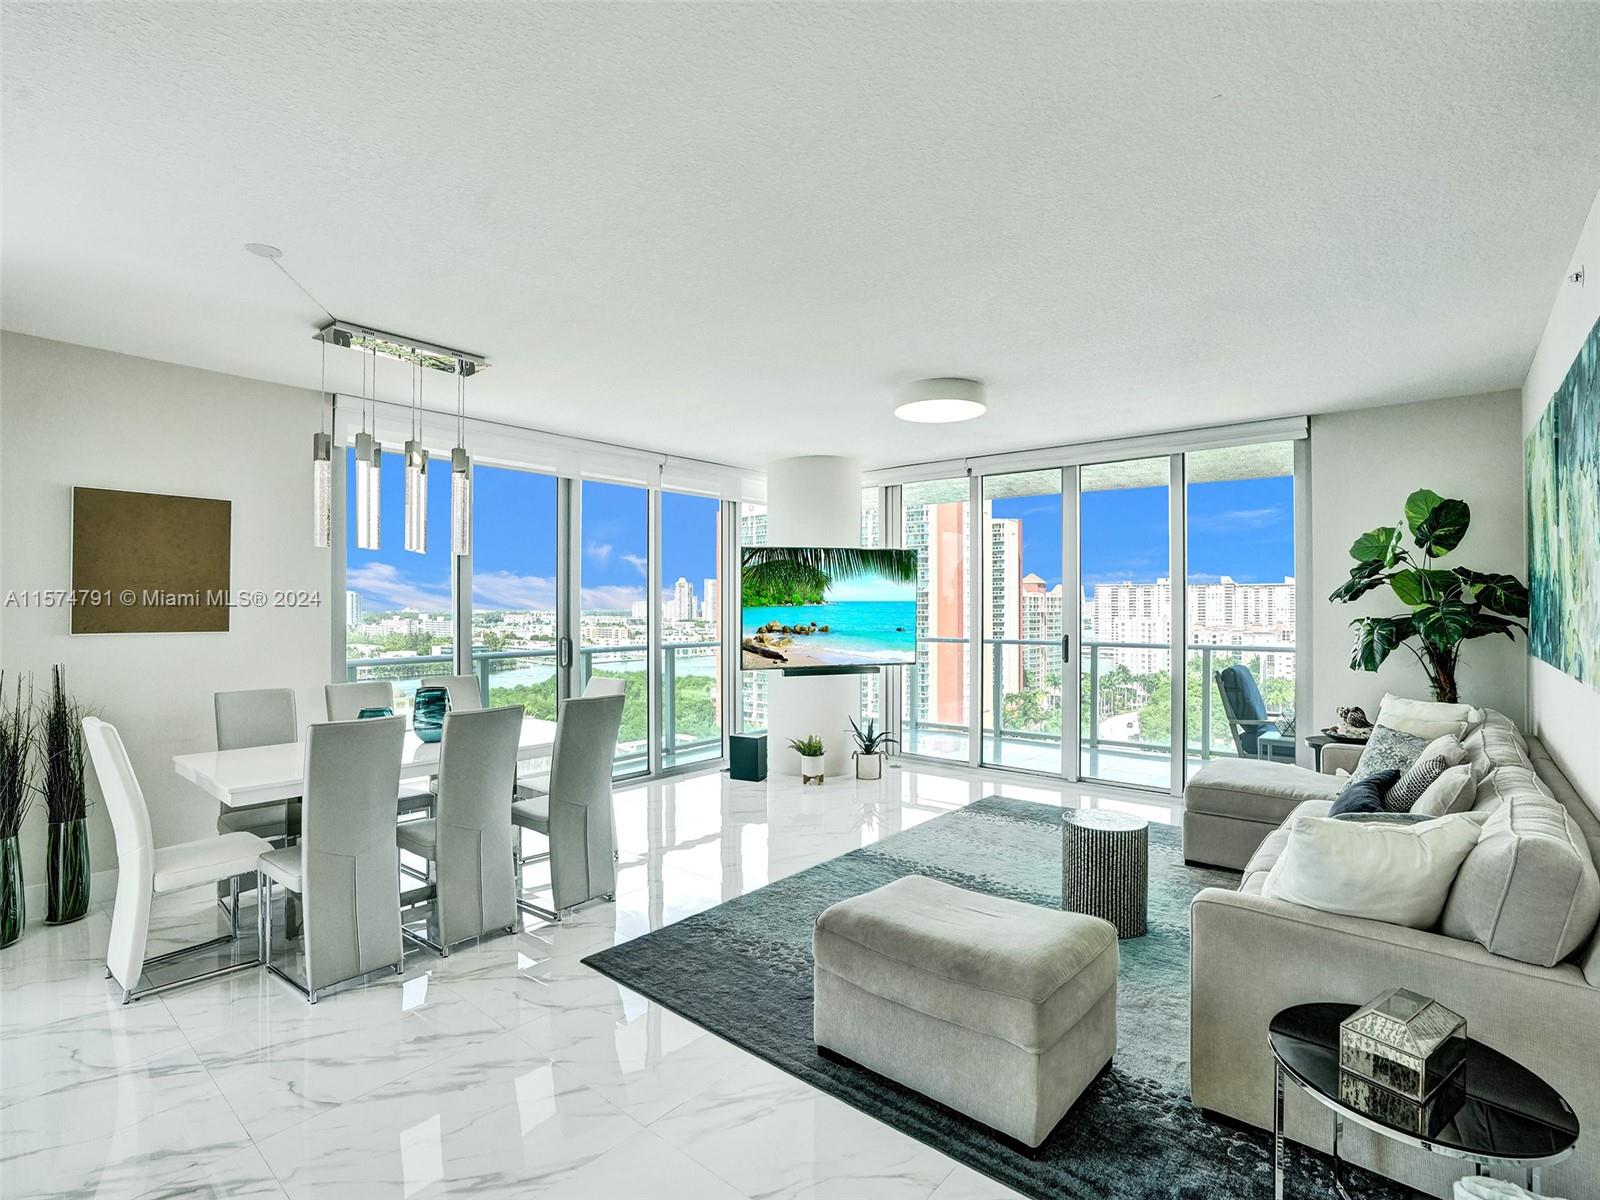 Located in Sunny Isles Beach - one of the most beautiful areas in Miami, walking distance from the beach, restaurants, and bars. Turnkey furnished corner unit in a brand new boutique building with 5* amenities. Expansive 3 beds, 3.5 baths, 1,892 SqFt, 10ft ceilings, floor-to-ceiling impact glass windows & doors, wrap-around balcony with beautiful panoramic view. Open floor plan with high-end European appliances, window treatments, and light fixtures. Generous primary suite with walk-in closet and a bath with a separate soaking tub and shower. The unit comes with storage space, 2 assigned parking spaces + complimentary valet. Amenities: beach service, 4 pools, jacuzzi, gym, Spa, kids club, theater, games room, bistro at the pool deck, party room, hotel suite for guests, and much more.